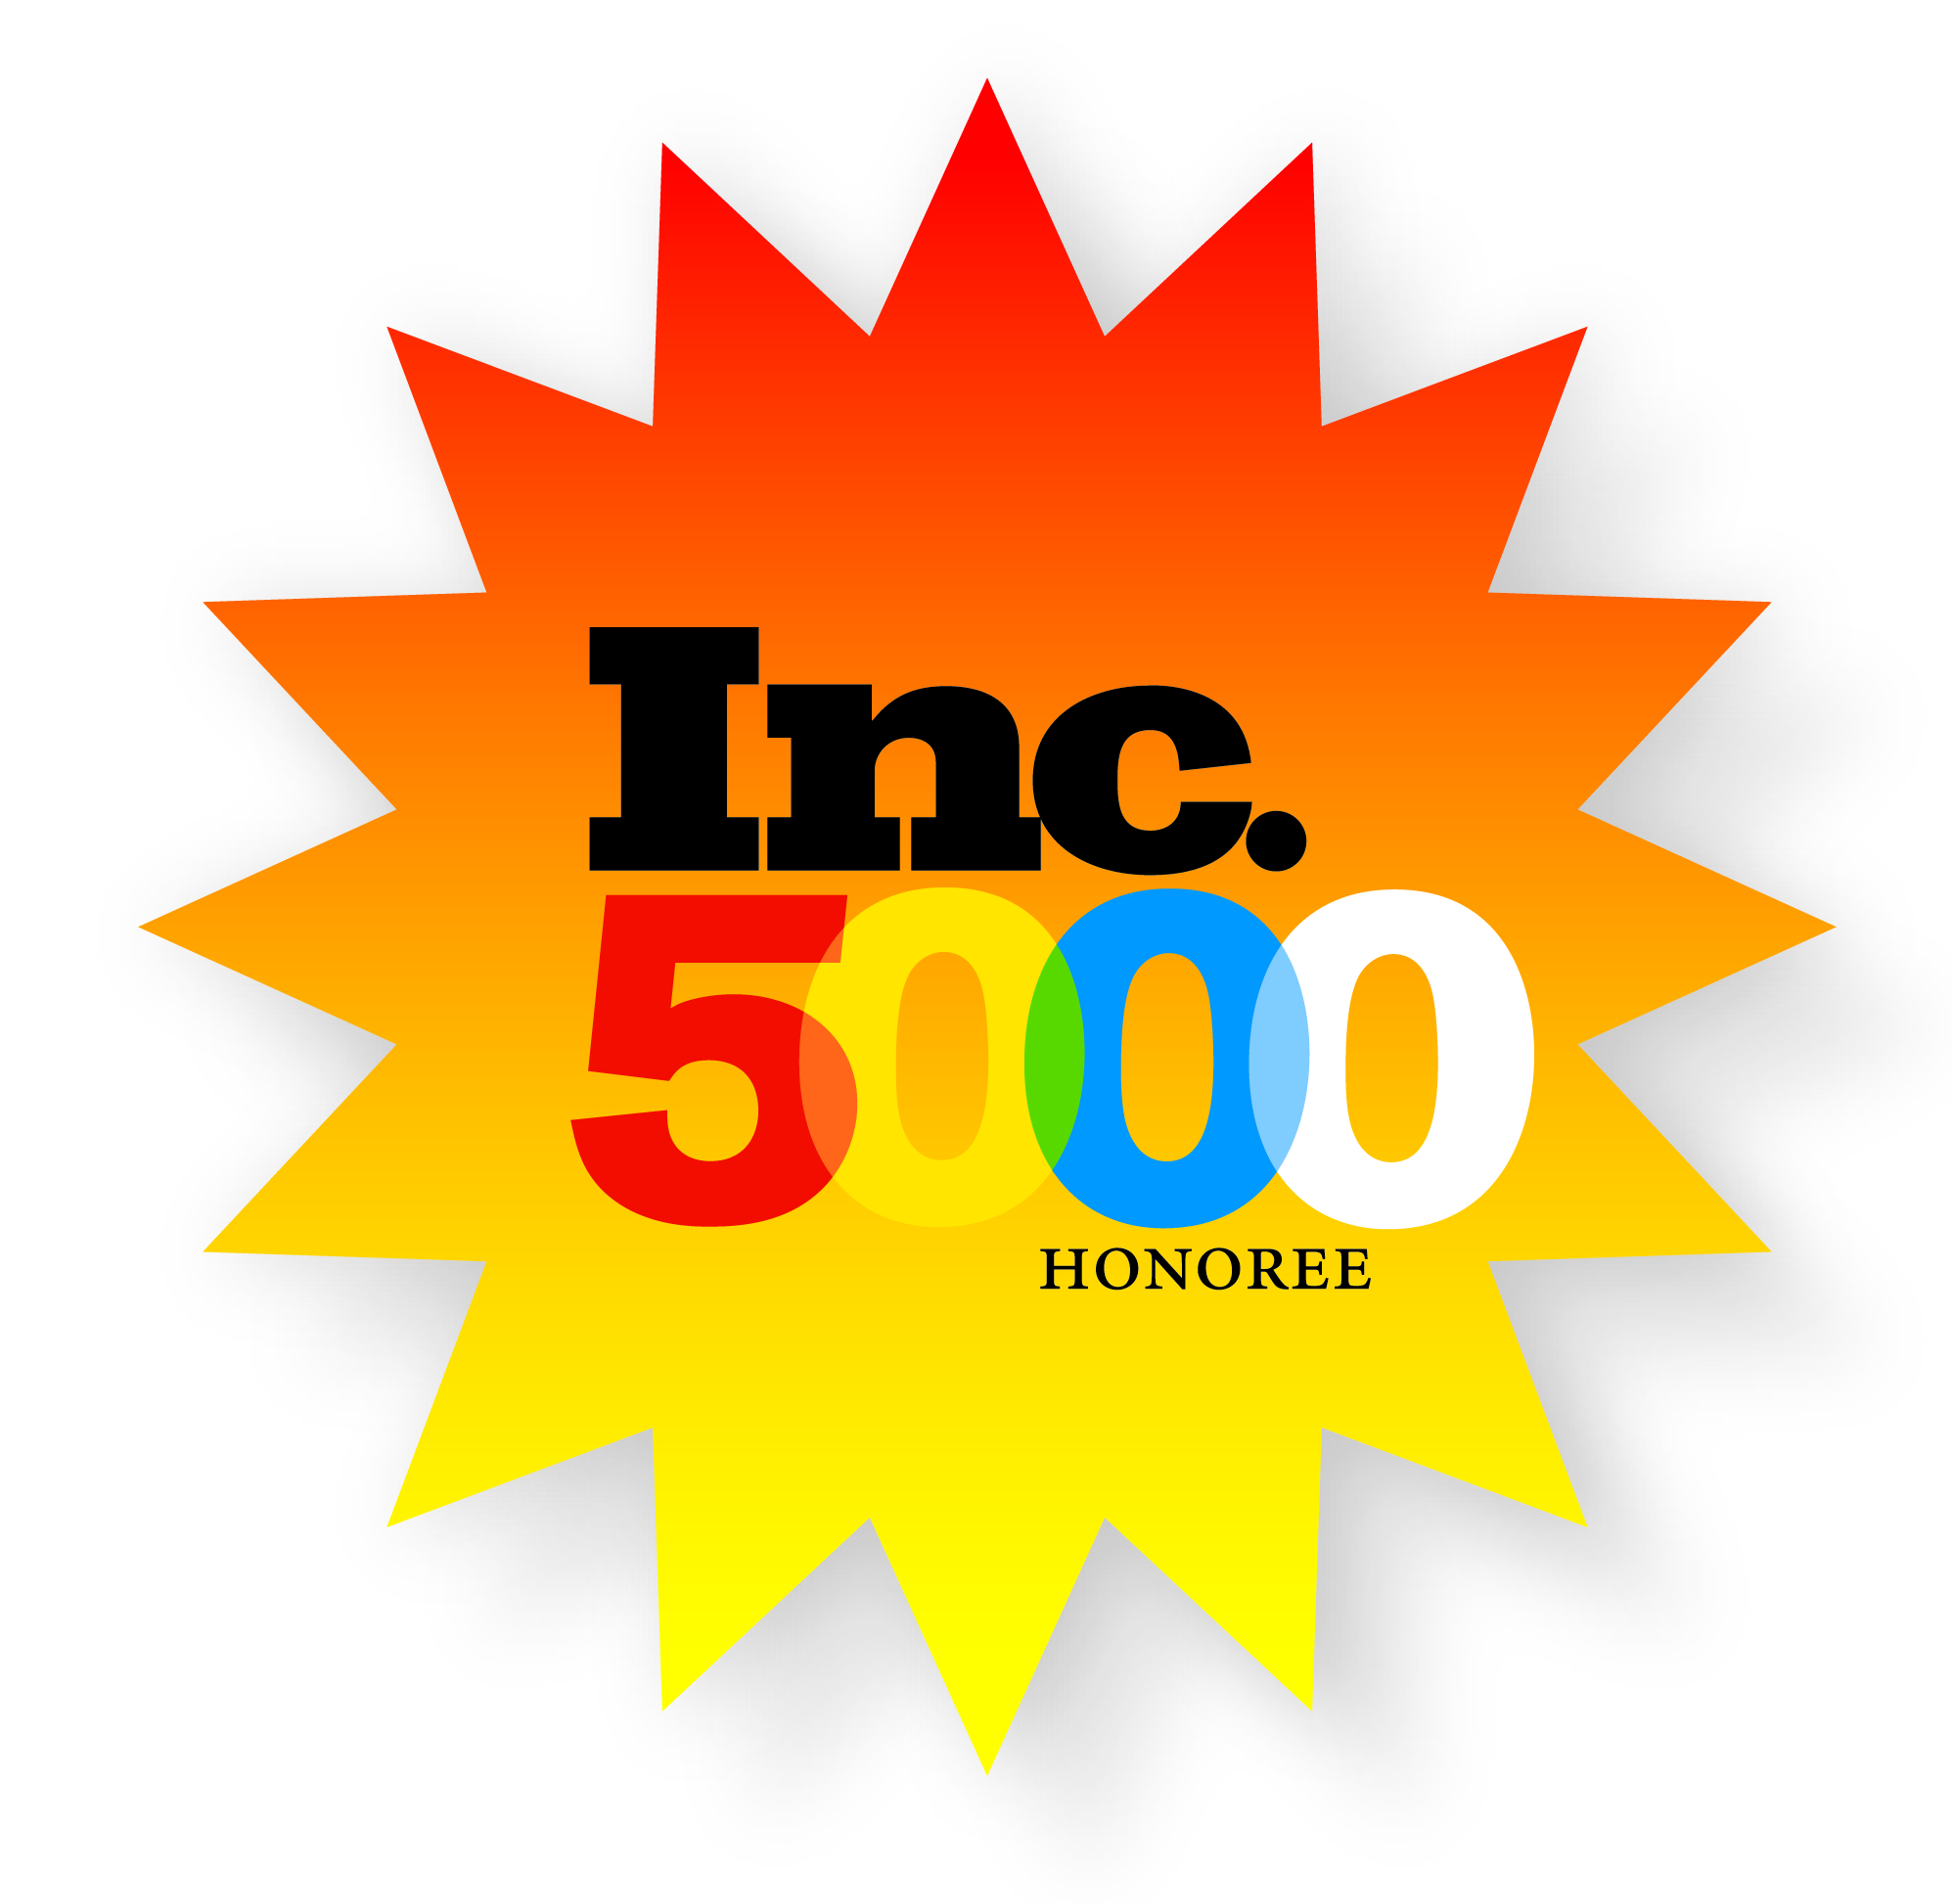 The Inc. 5000 list honors the fastest-growing private companies in America.